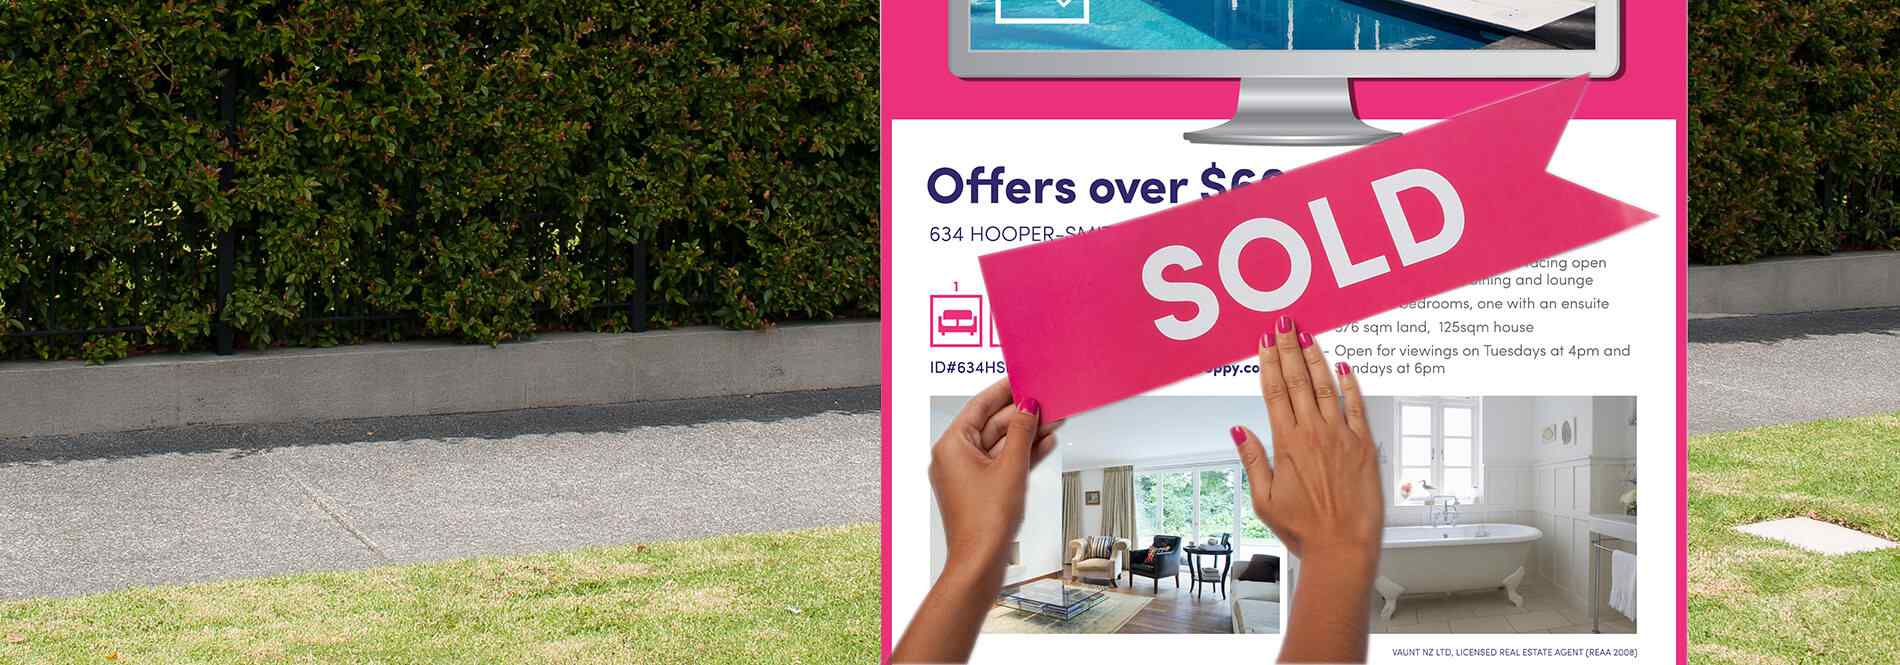 How to sell a property using Proppy